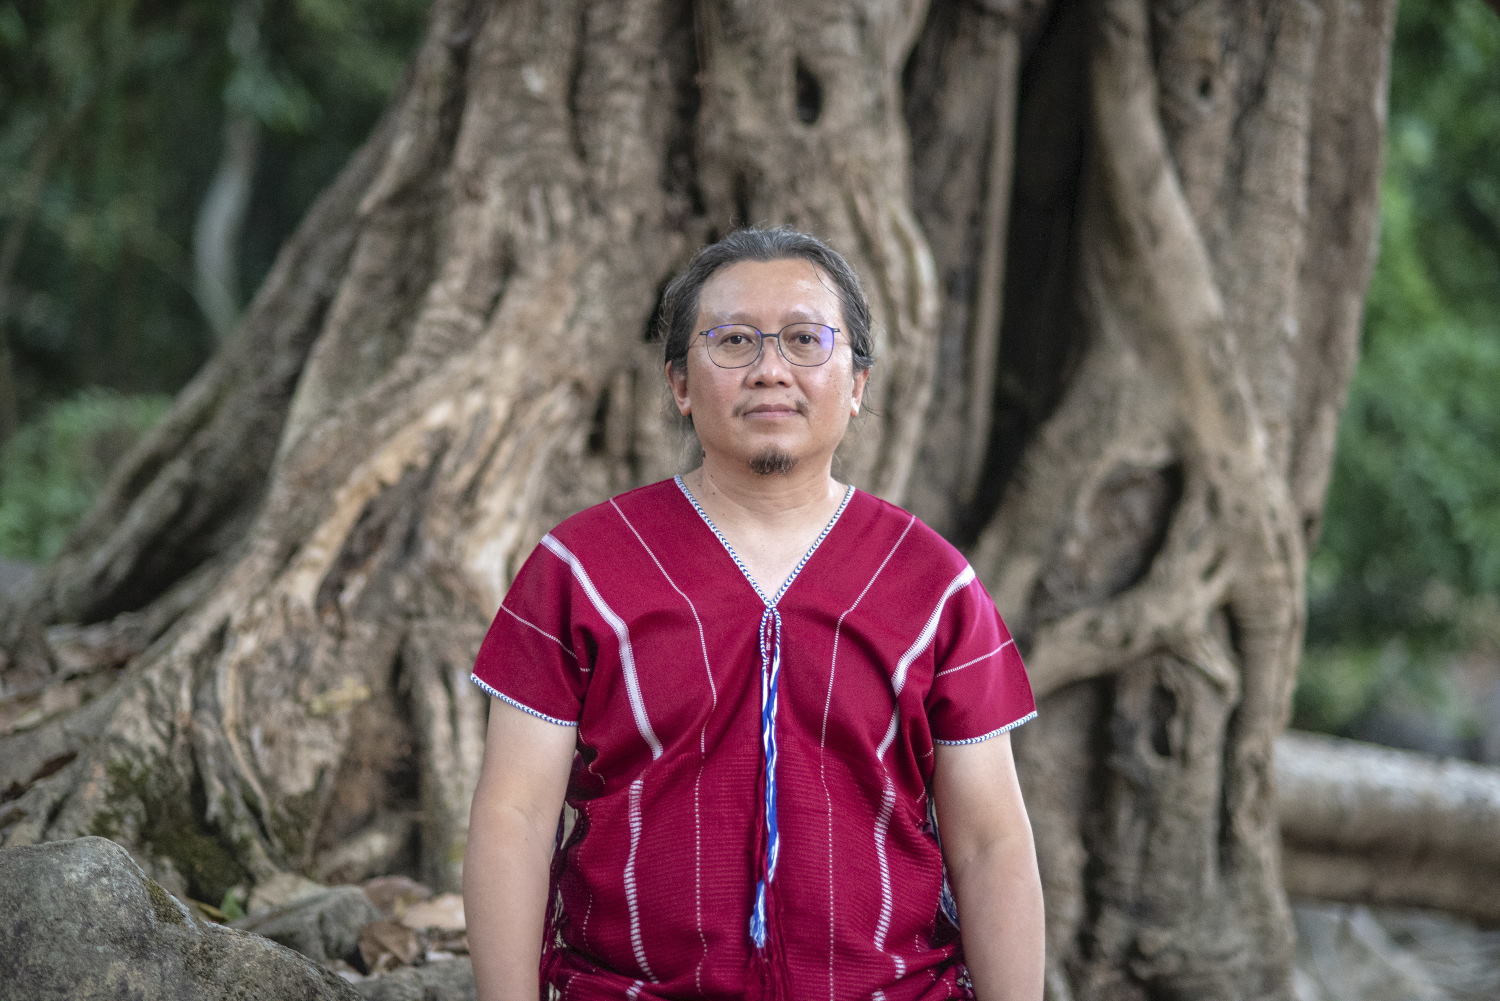 Paul Sein Twa poses for a portrait in the Karen Environmental and Social Action Network Indigenous Eco-Learning Centre in Ta May Hta village located in the Salween Peace Park in Kayin state. (Brennan O’Connor/The Goldman Environmental Prize)